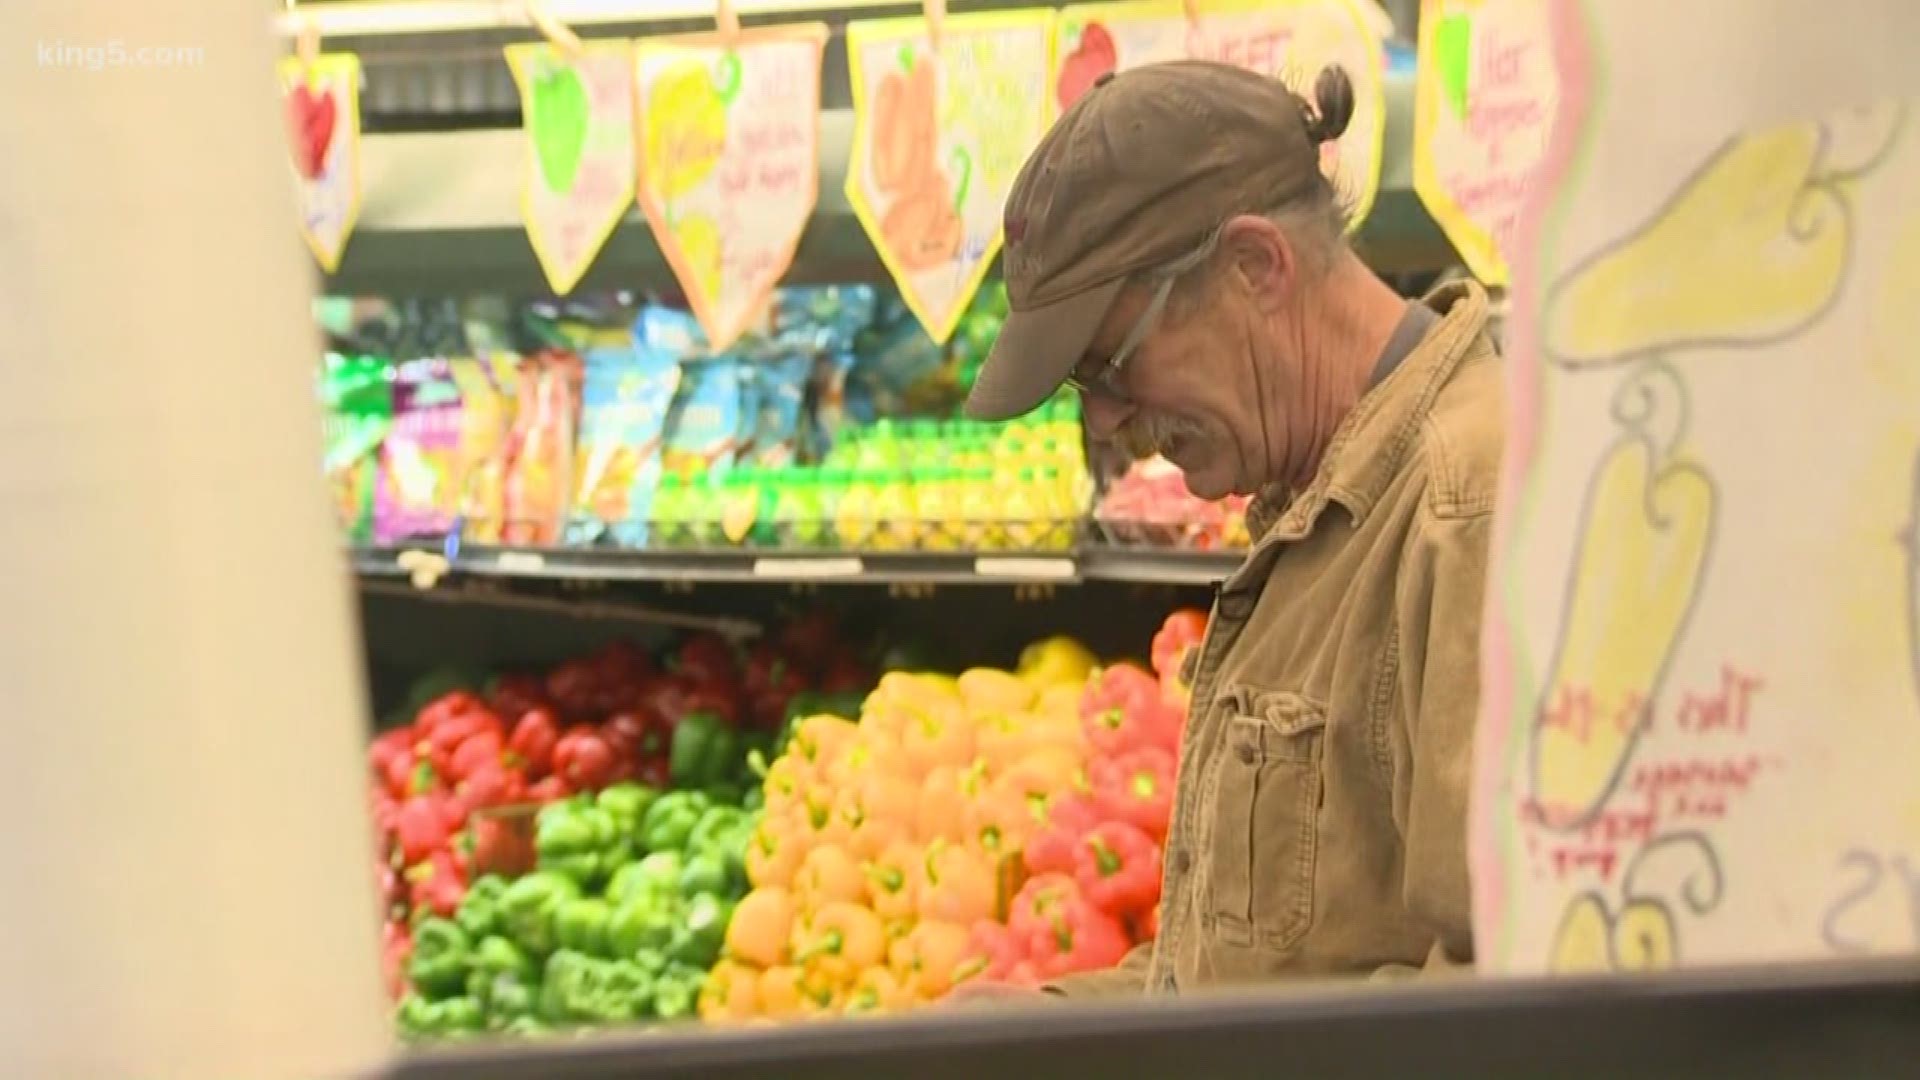 The Yakima Fruit Market in Bothell could be impacted by construction for a Sound transit project approved by voters in 2016. The place has been a fixture on Bothell Way NE for 81 years.